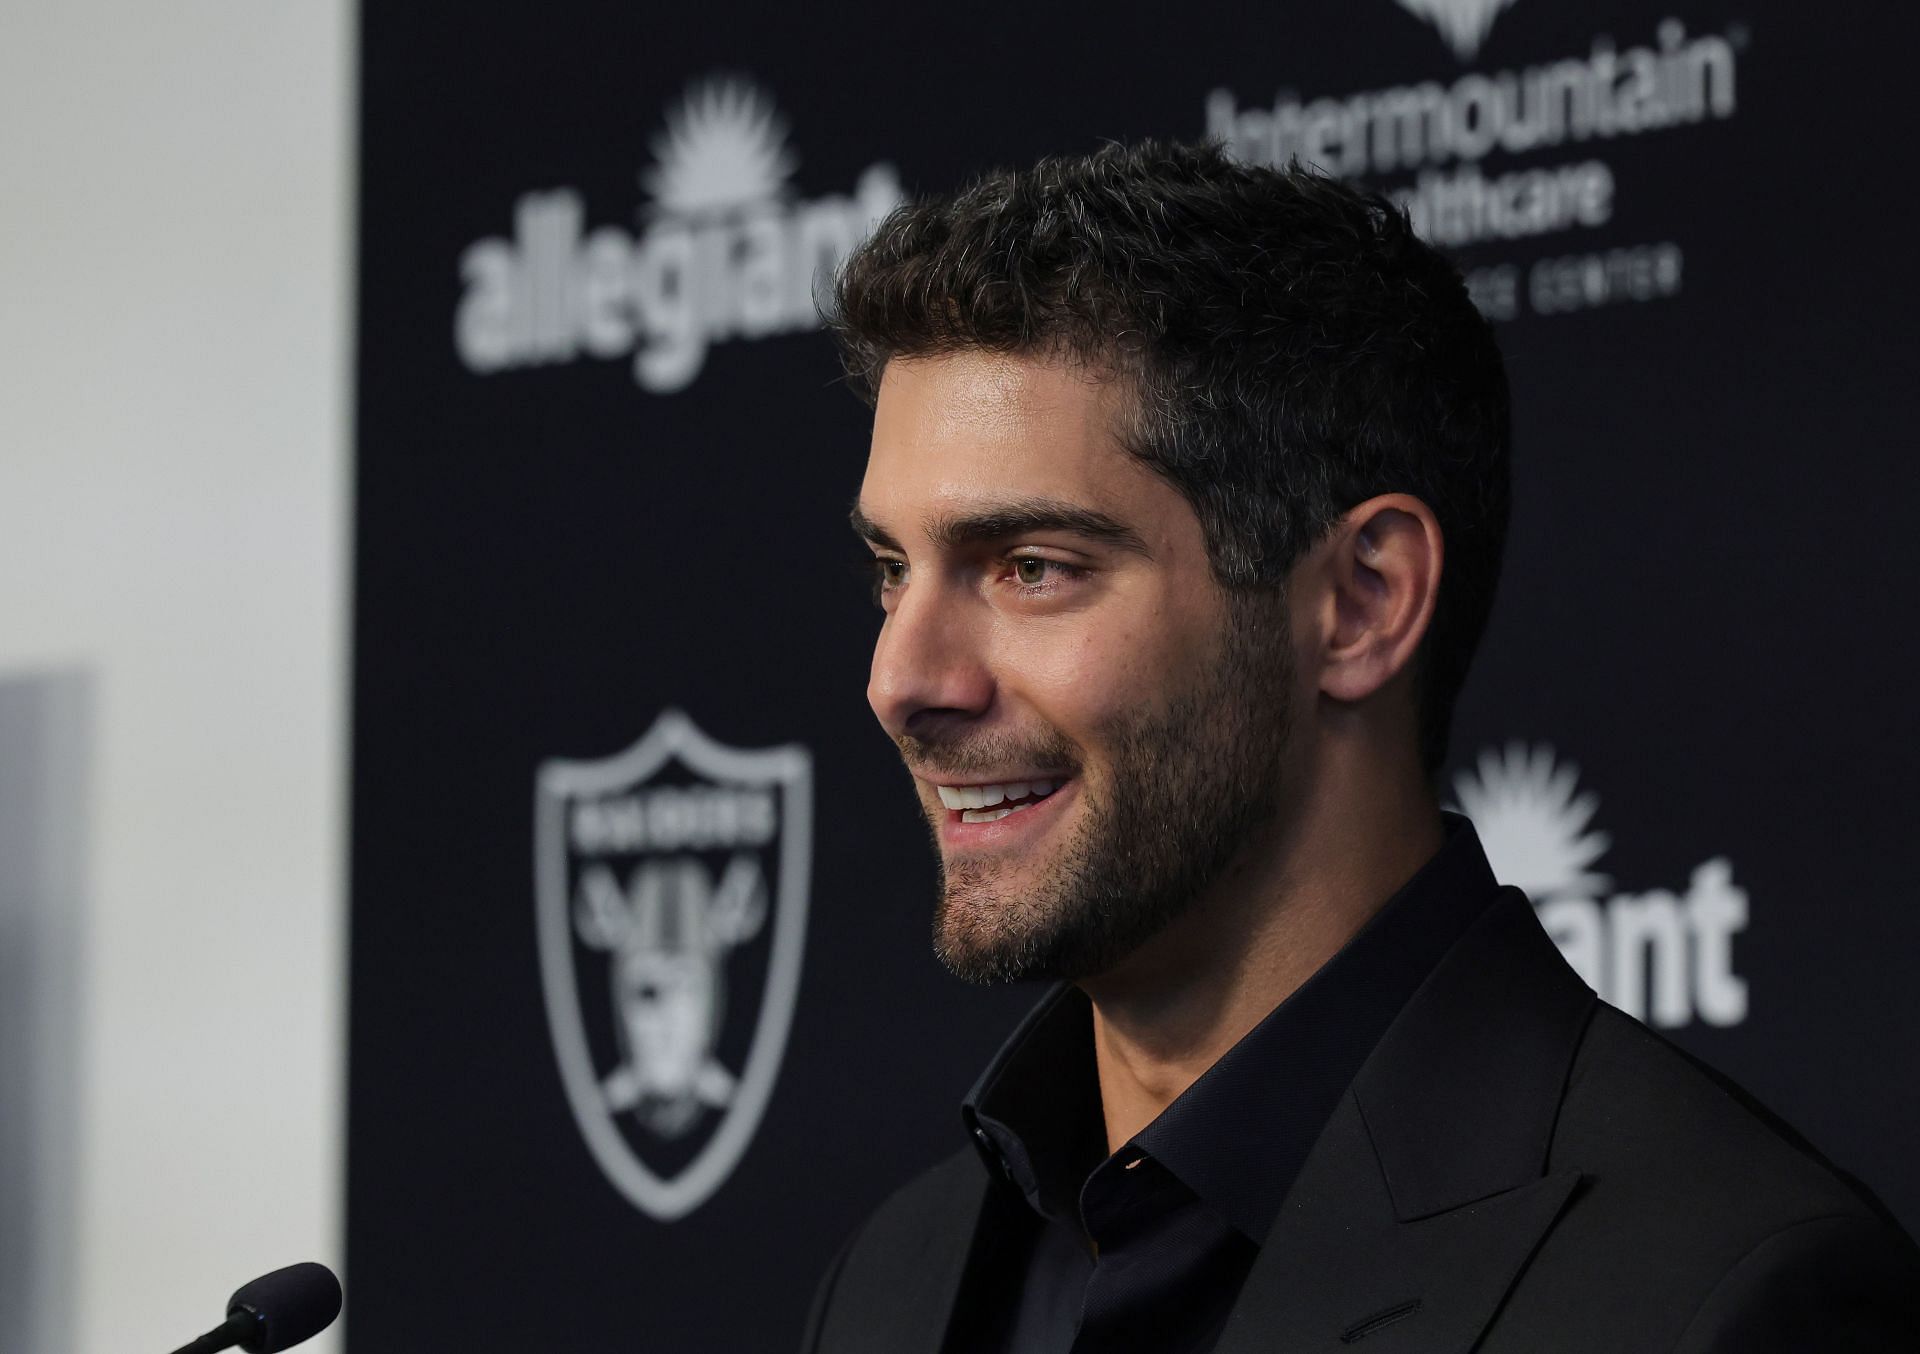 Jimmy Garoppolo joined the Raiders